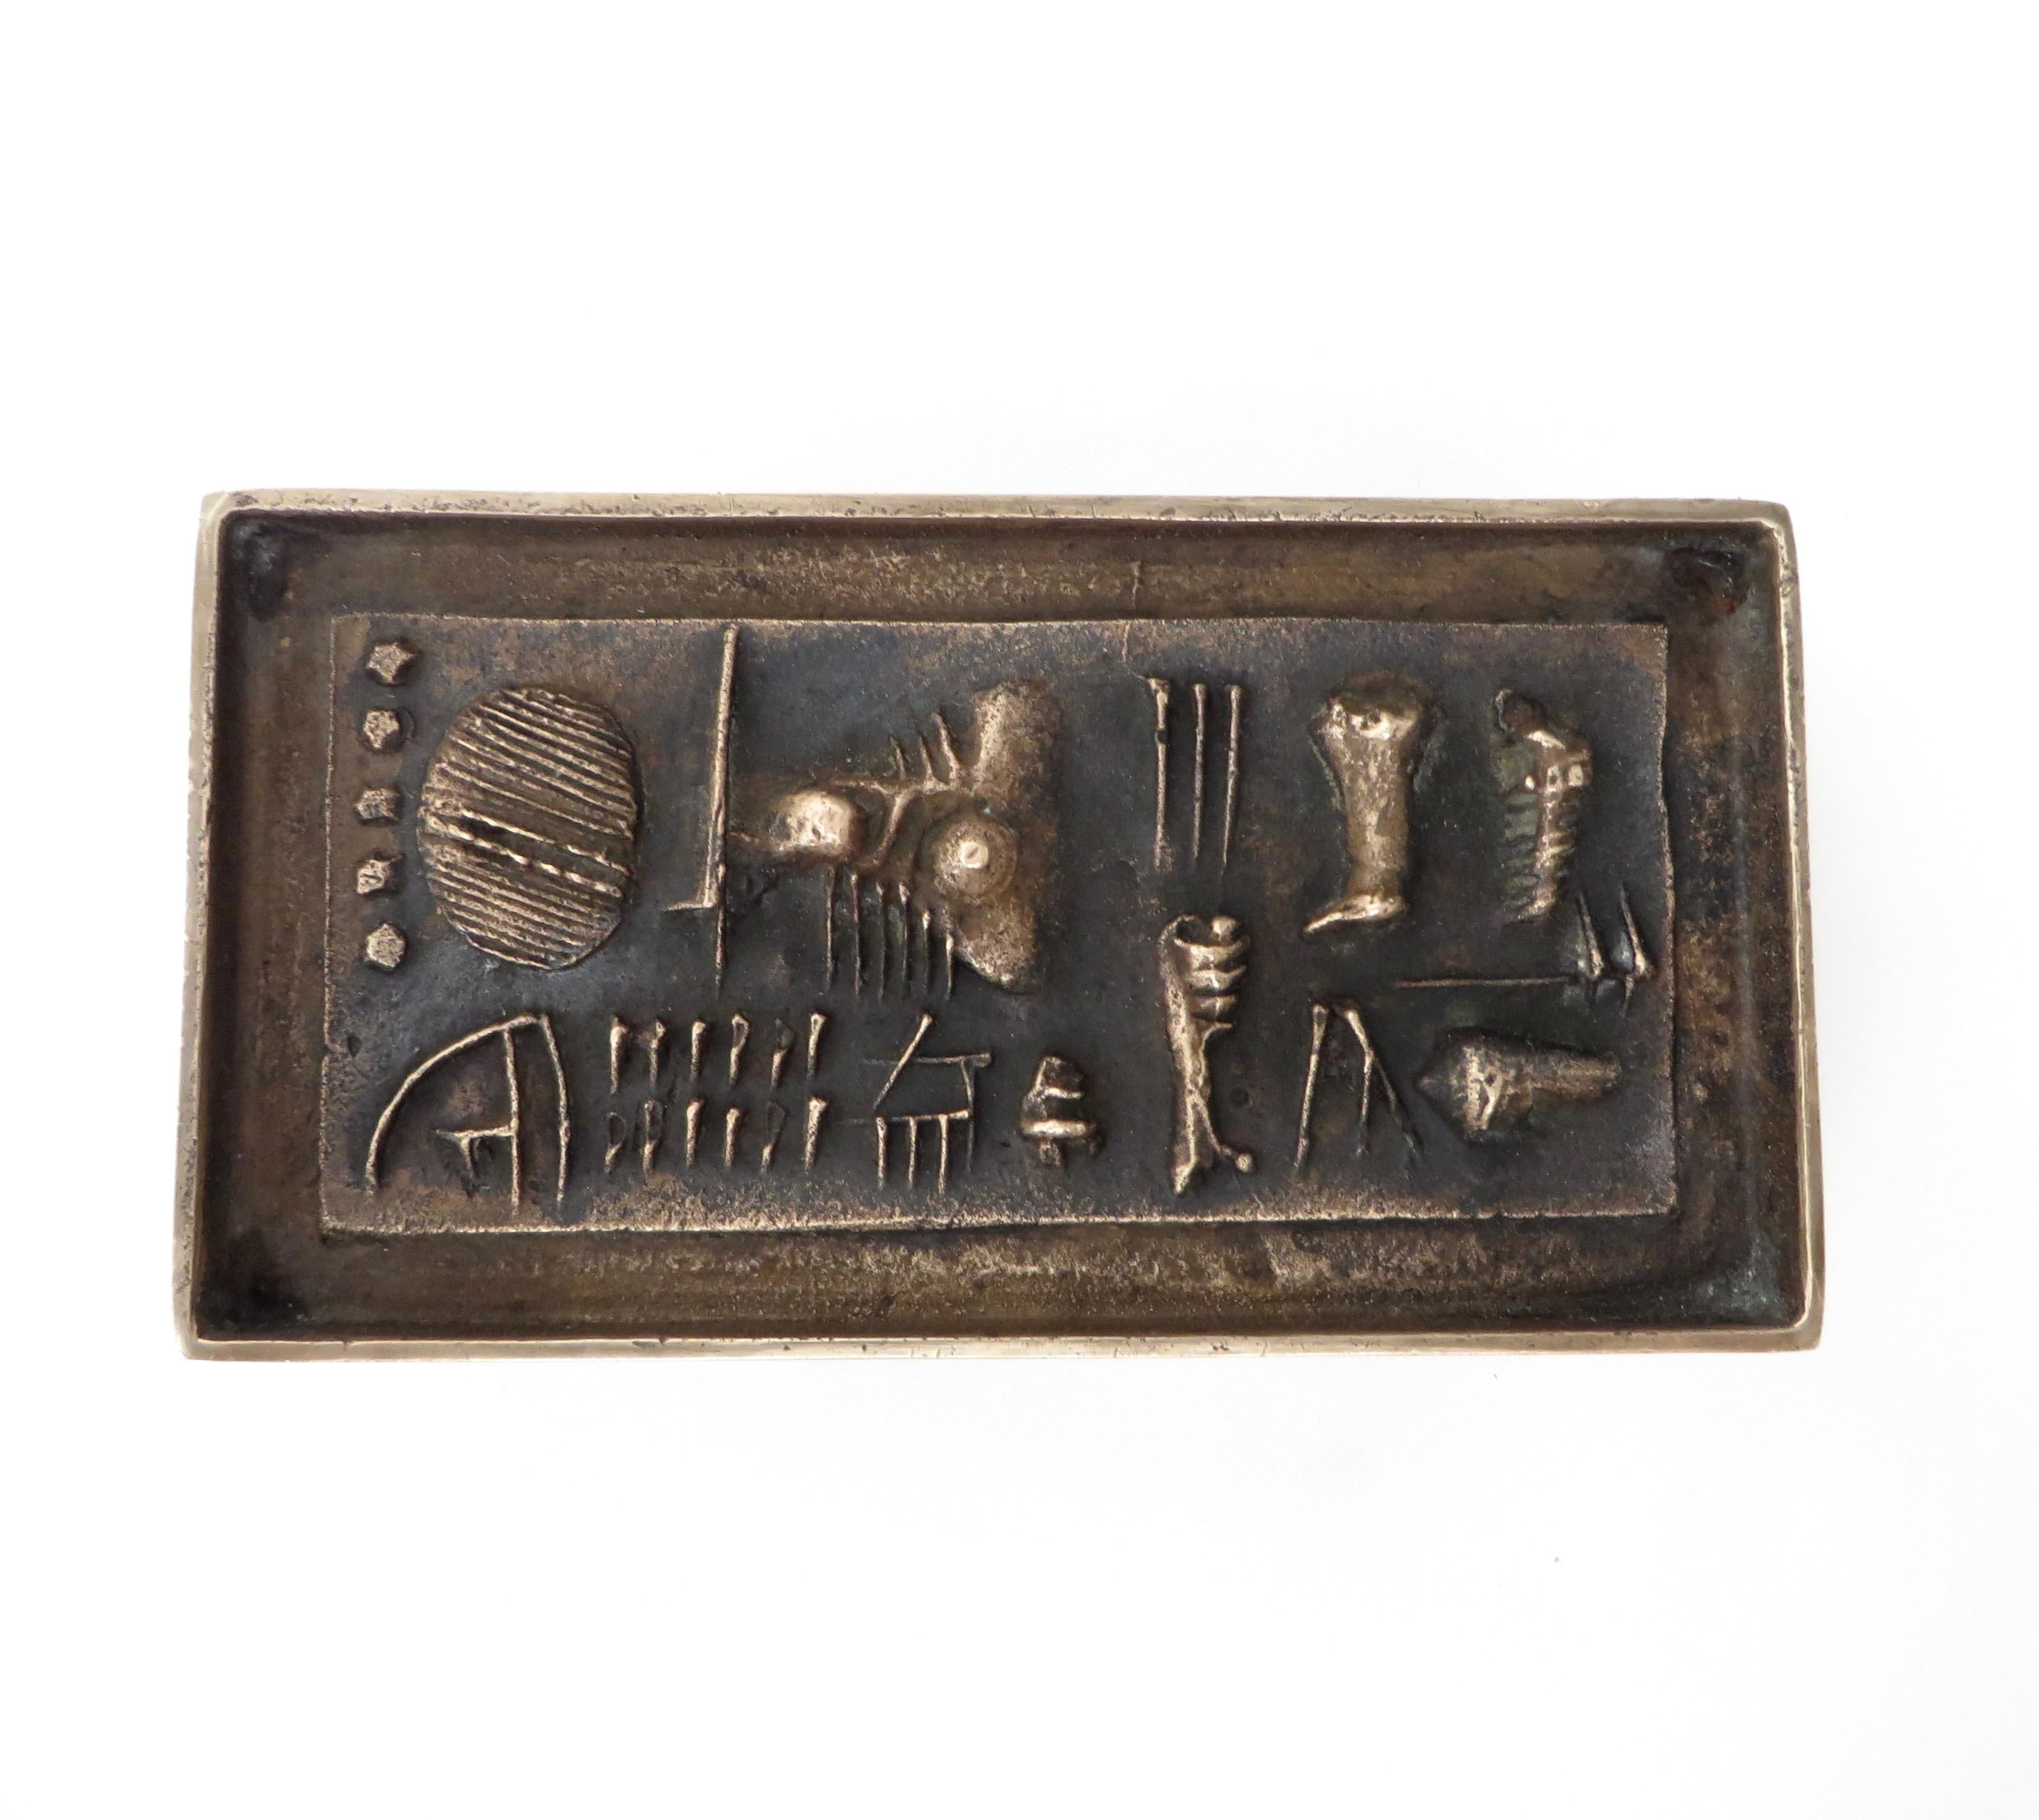 Gio and Arnoldo Pomodoro Cast Bronze Box Sculpture Signed II Sestante 
Sculptural box with lid decorated with geometric motifs, after 1957
Signed under the base: IL SESTANTE, POMODORO
The box is part of a series of four boxes made by the two